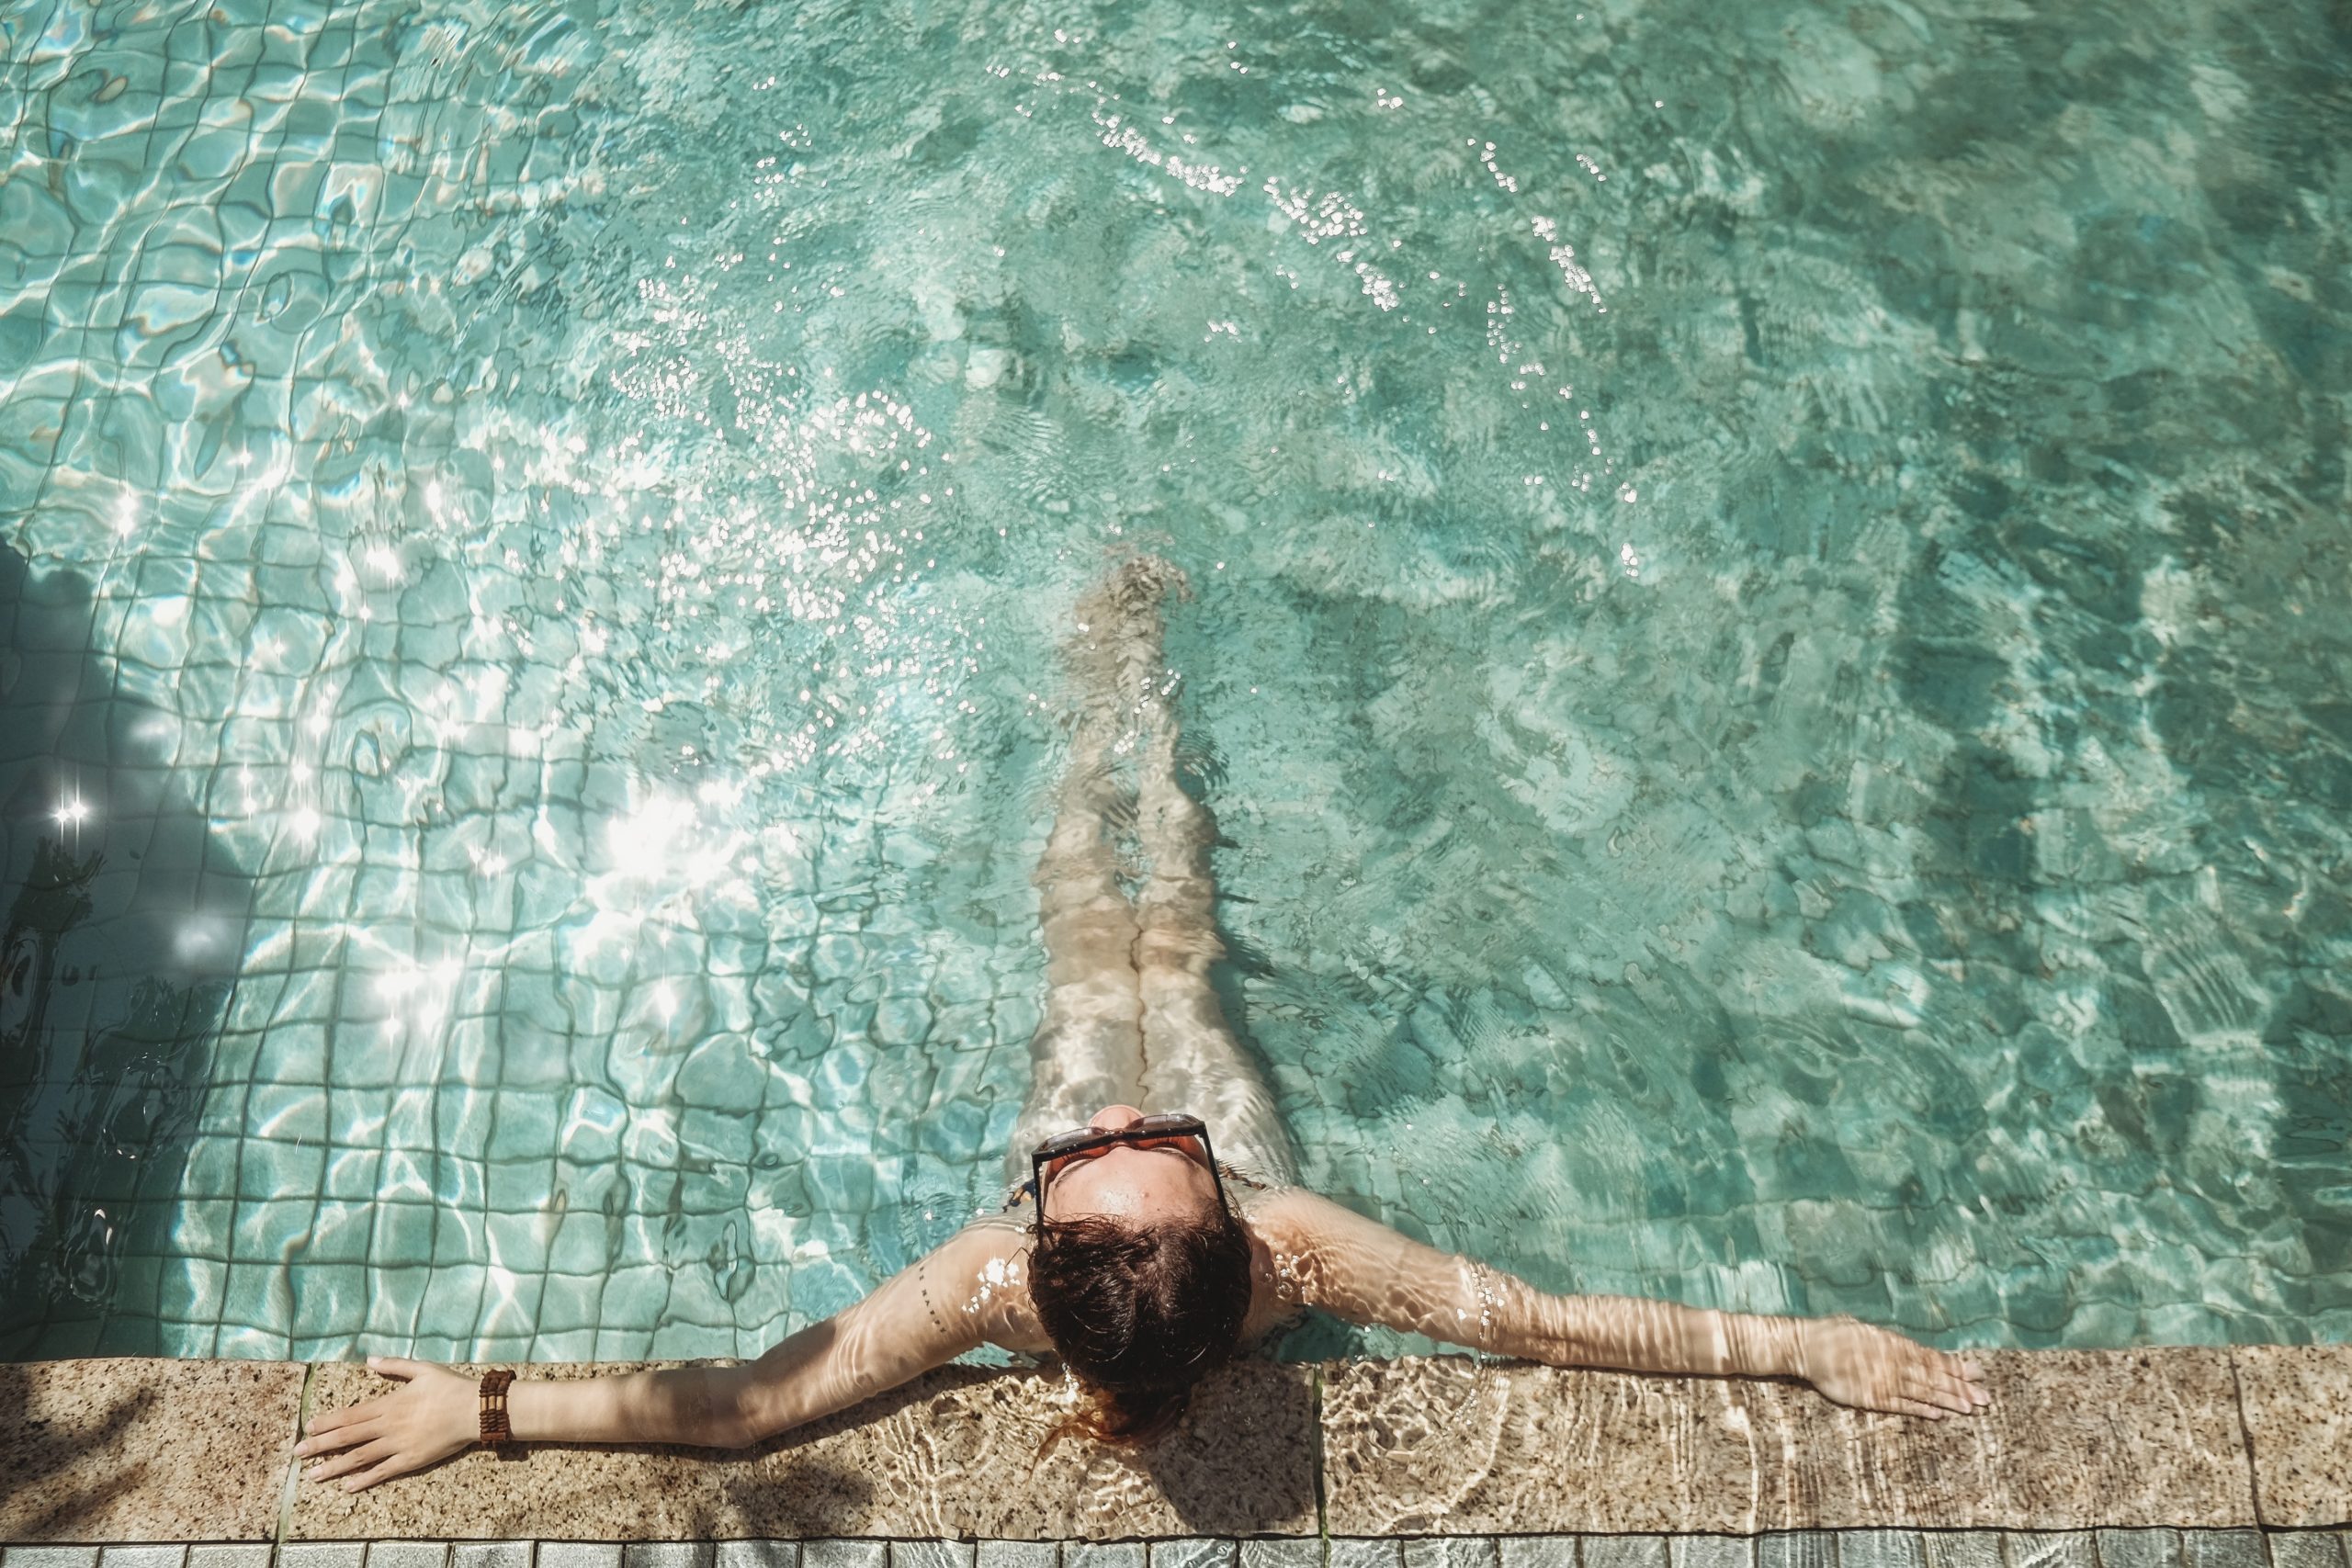 A person relaxing in a swimming pool